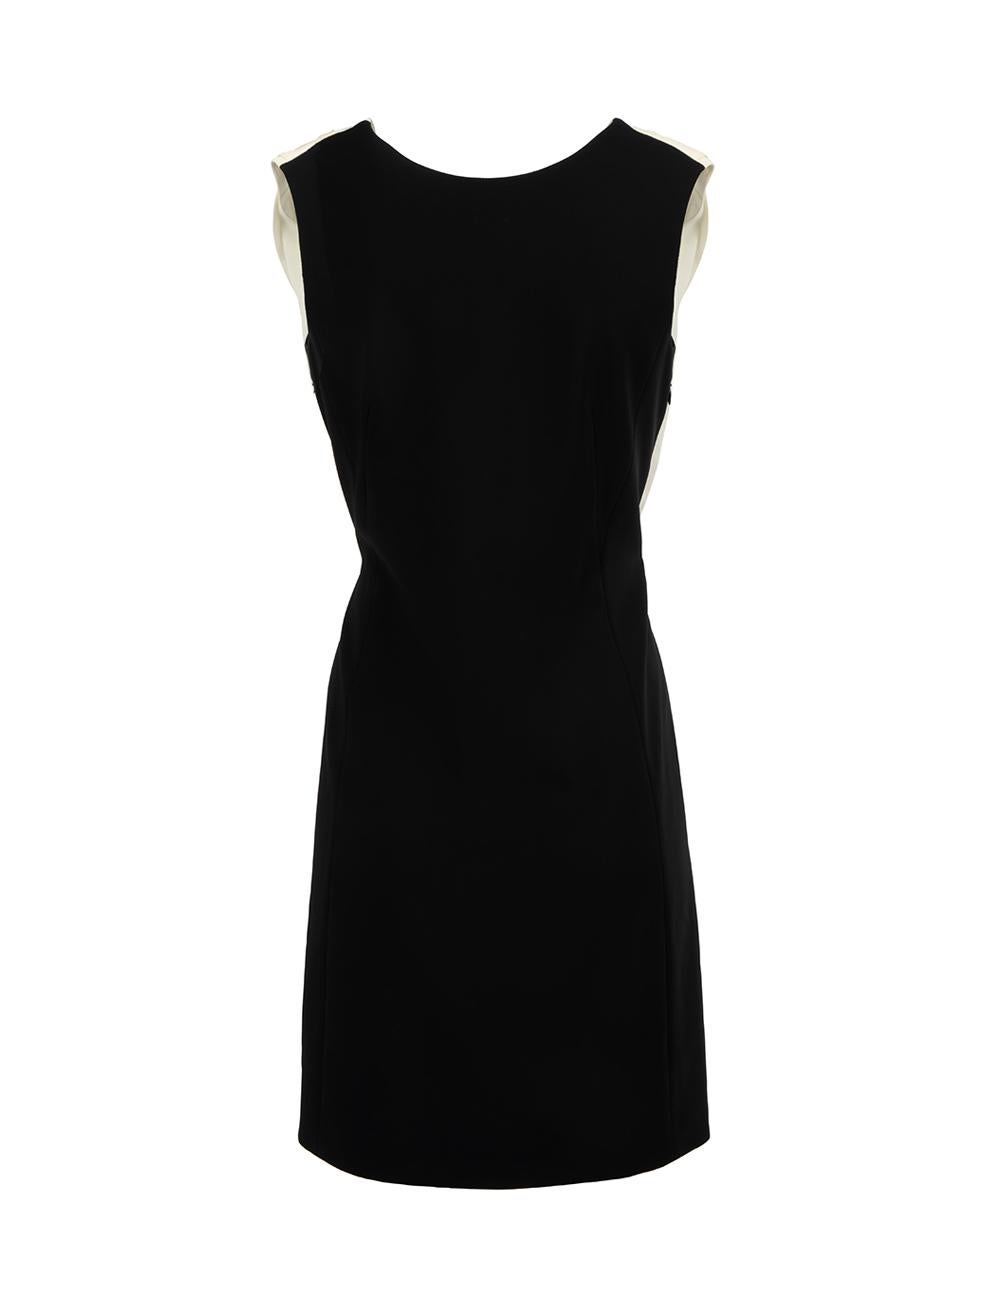 Pre-Loved Moschino Women's Black & Cream Back Pleated Wrap Panel Dress In Excellent Condition For Sale In London, GB